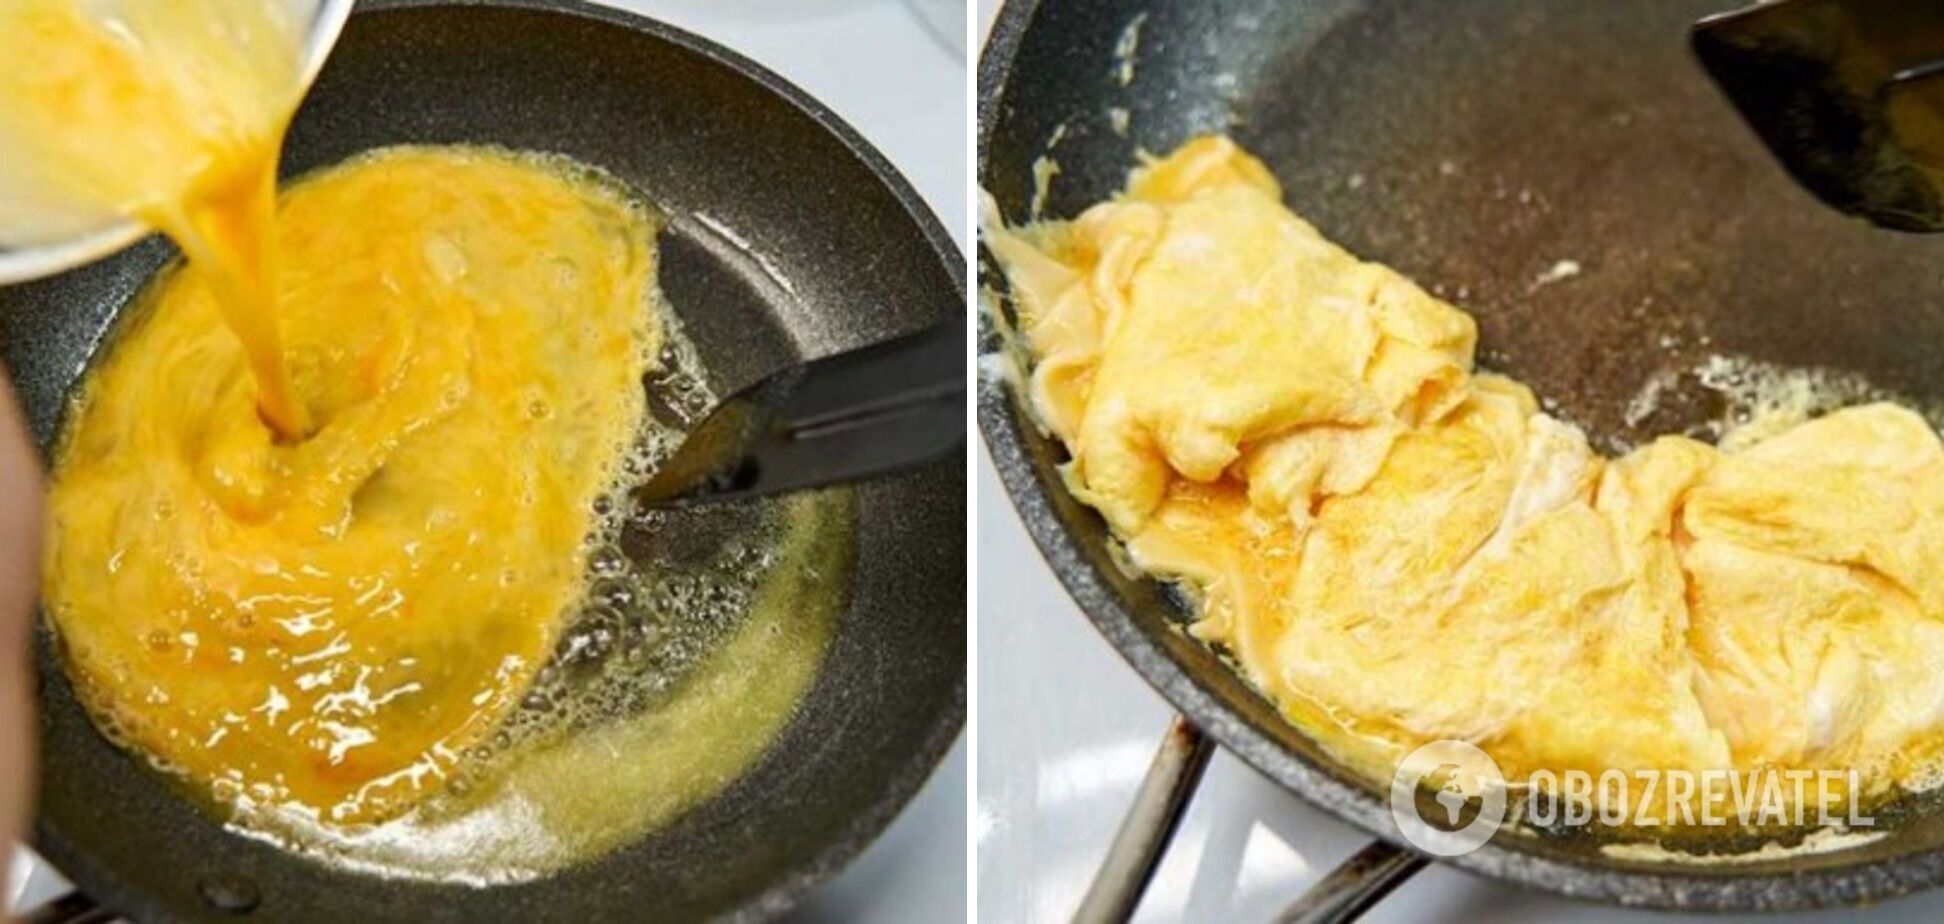 How to fry omelet properly